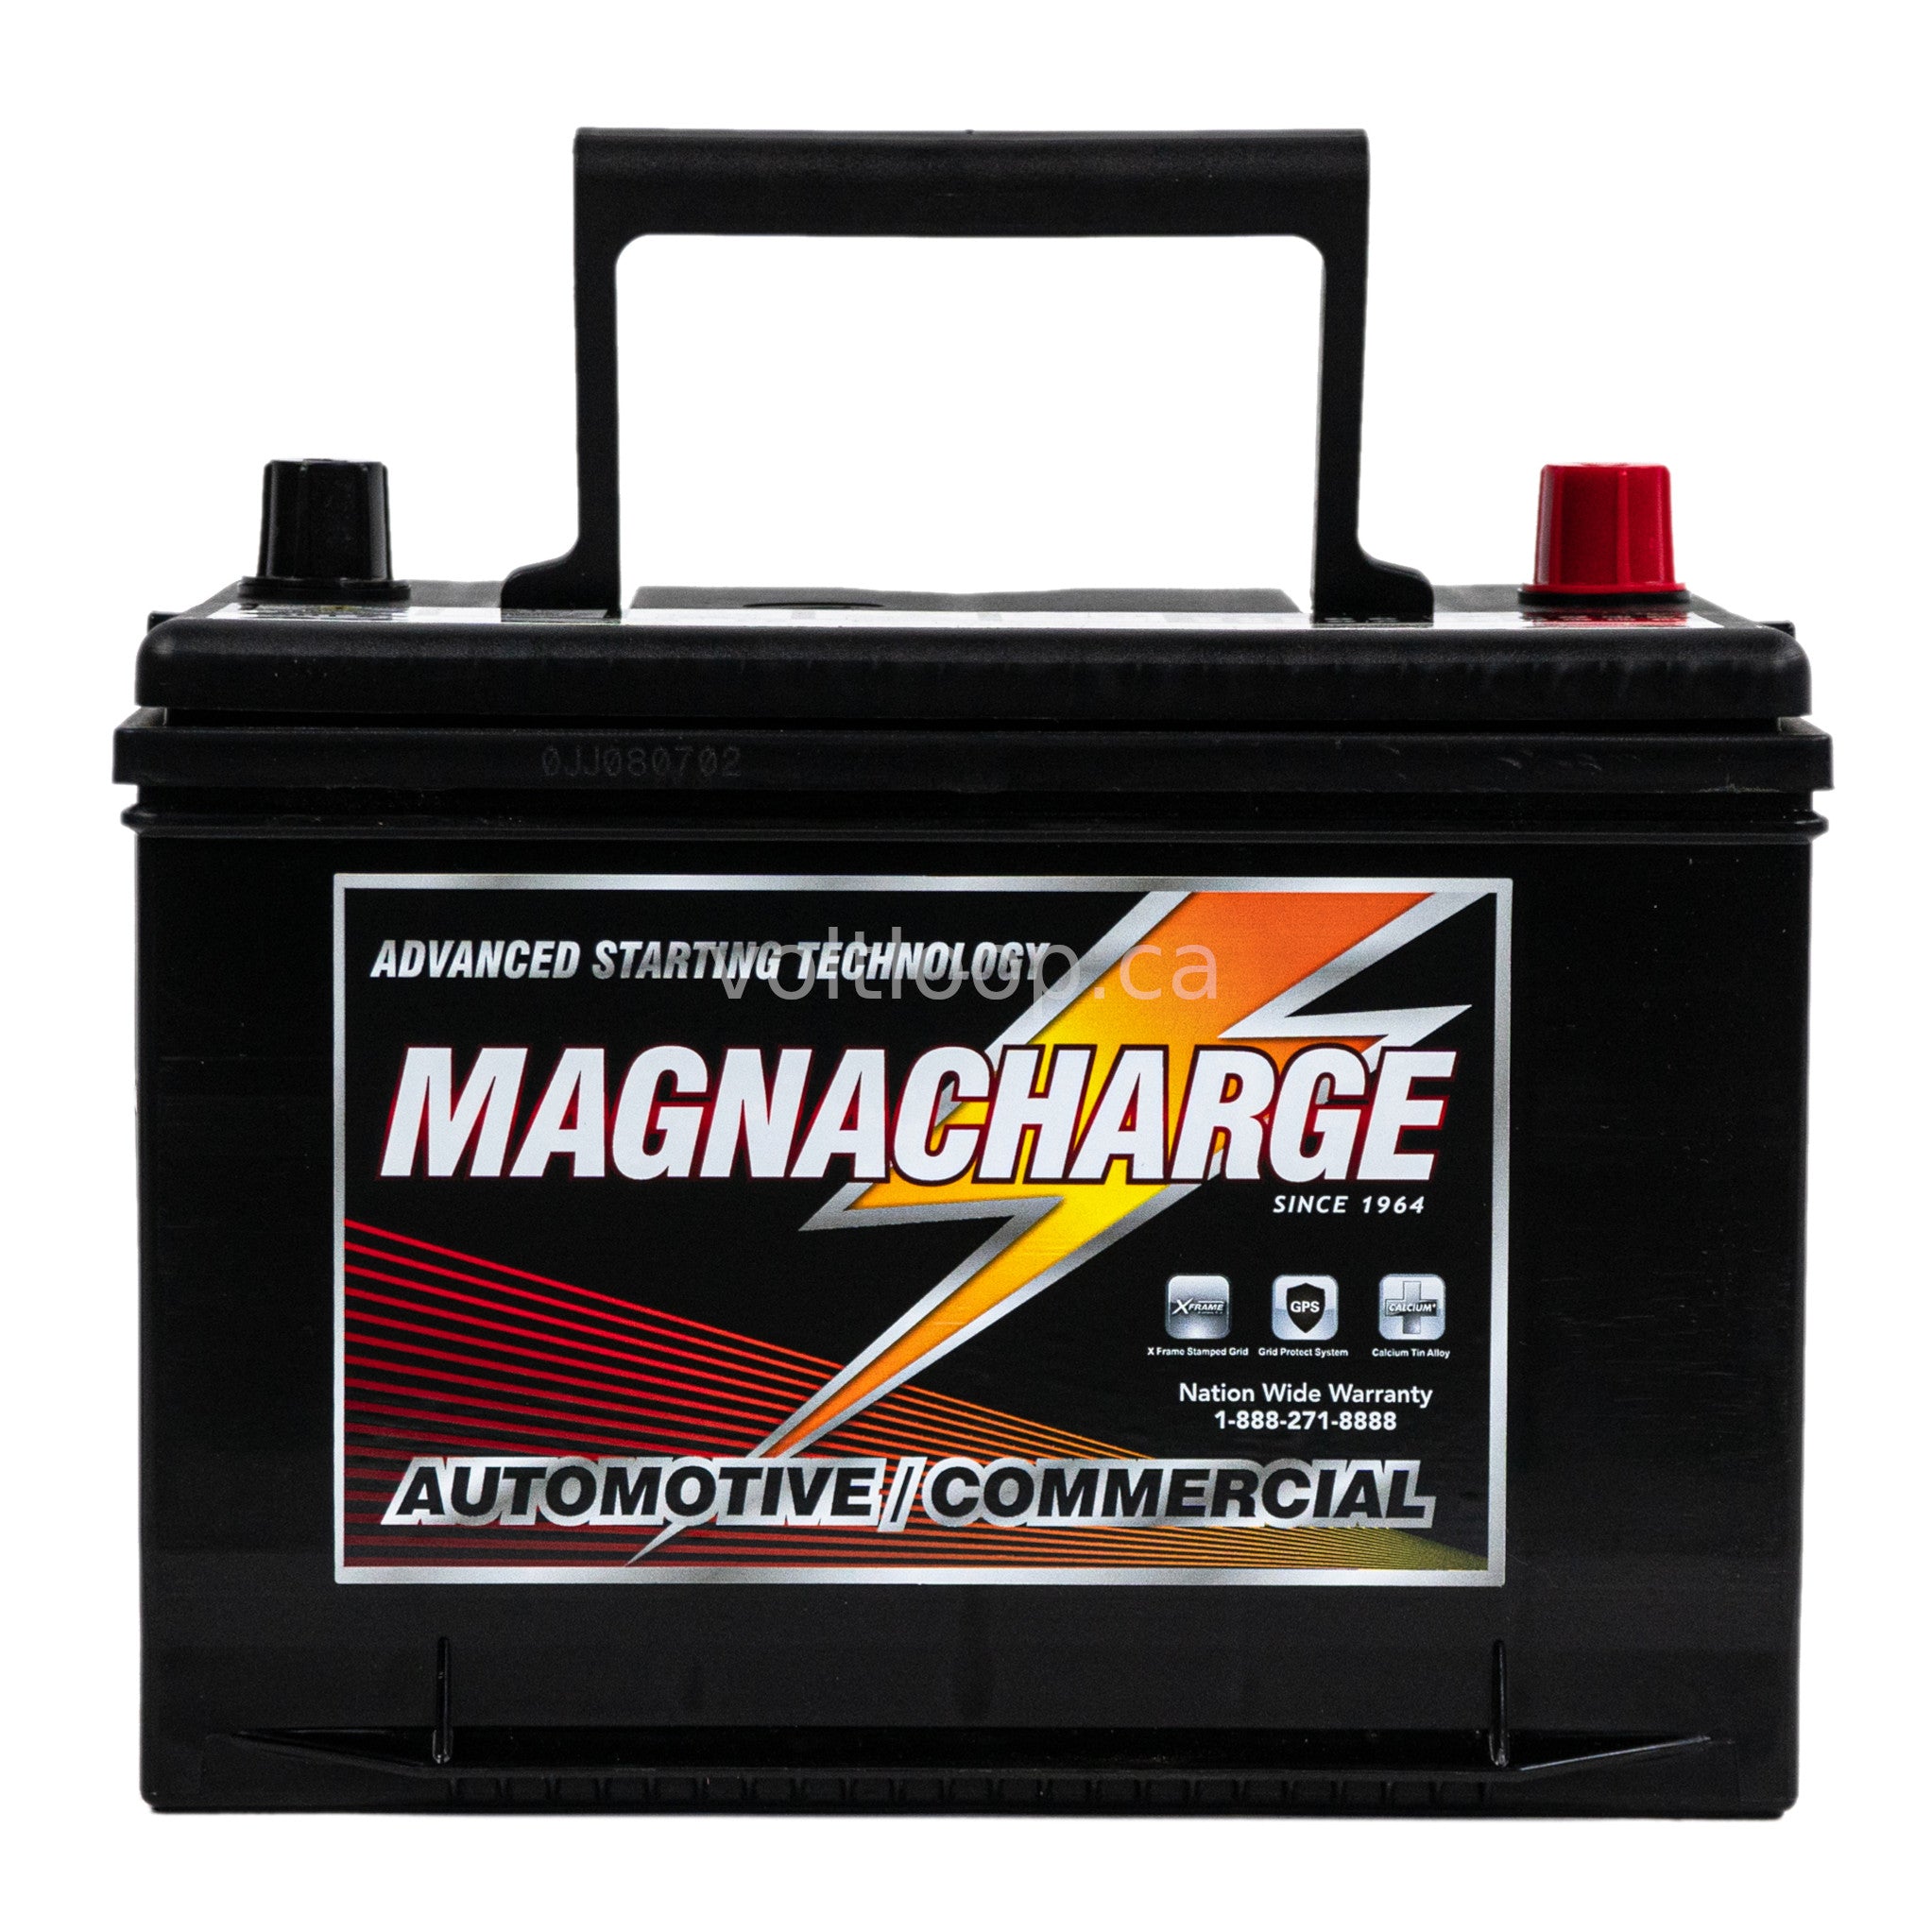 Magnacharge 78DT-1000 Group 34/78 Car Battery